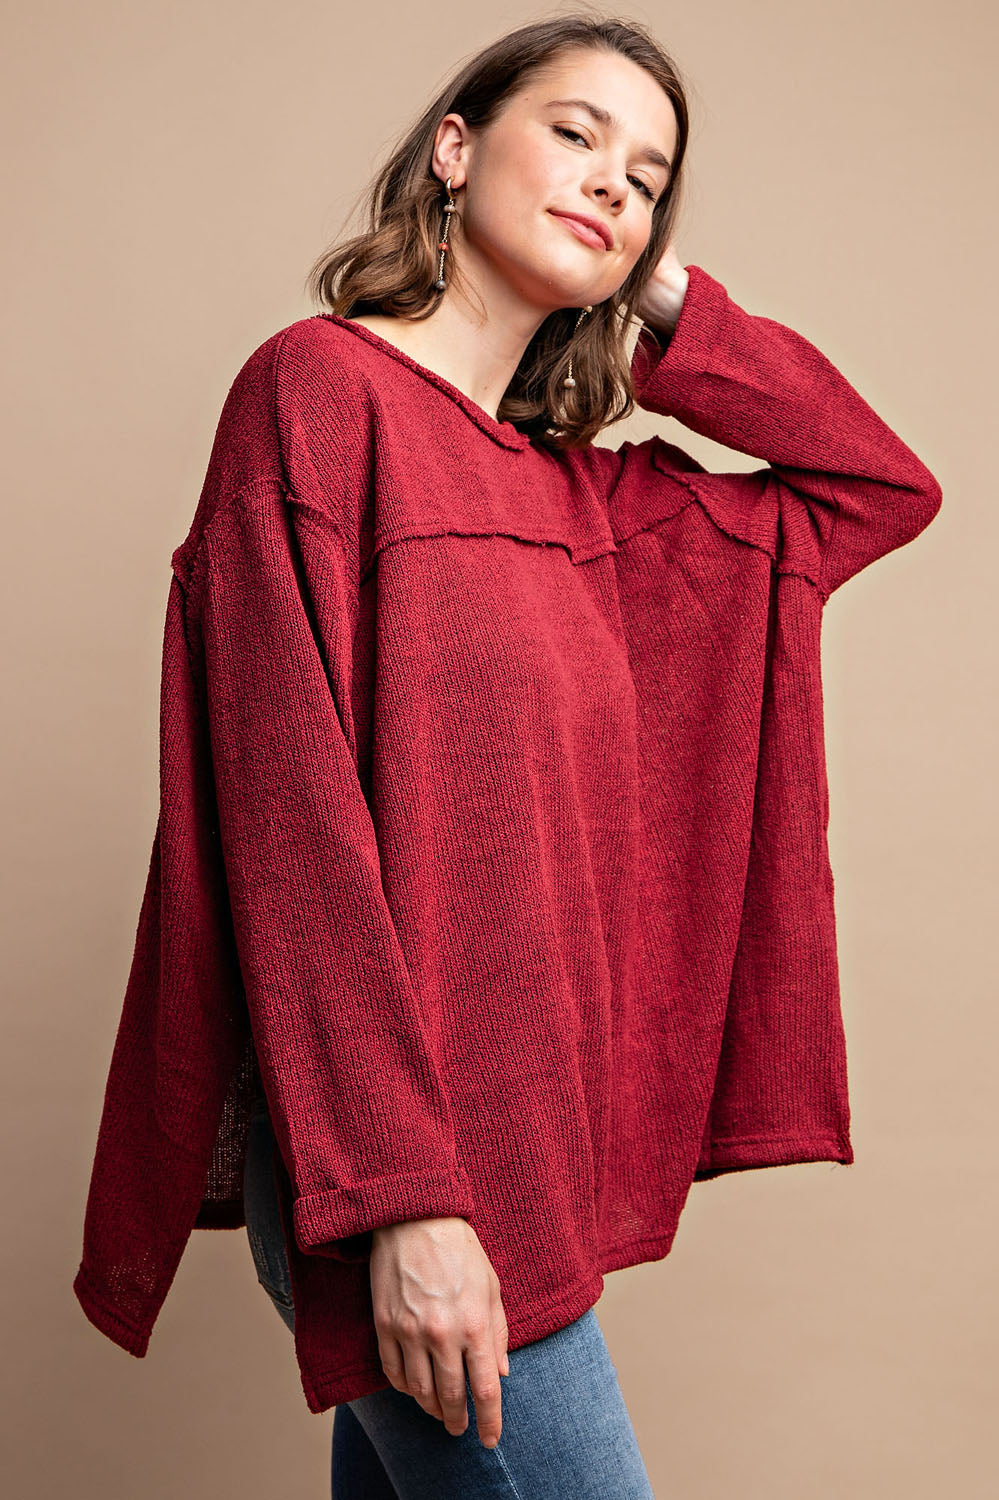 SPECIAL PRICE - Solid Knit Boxy Top w/Side Slit, Raw Edge Detail - Wine